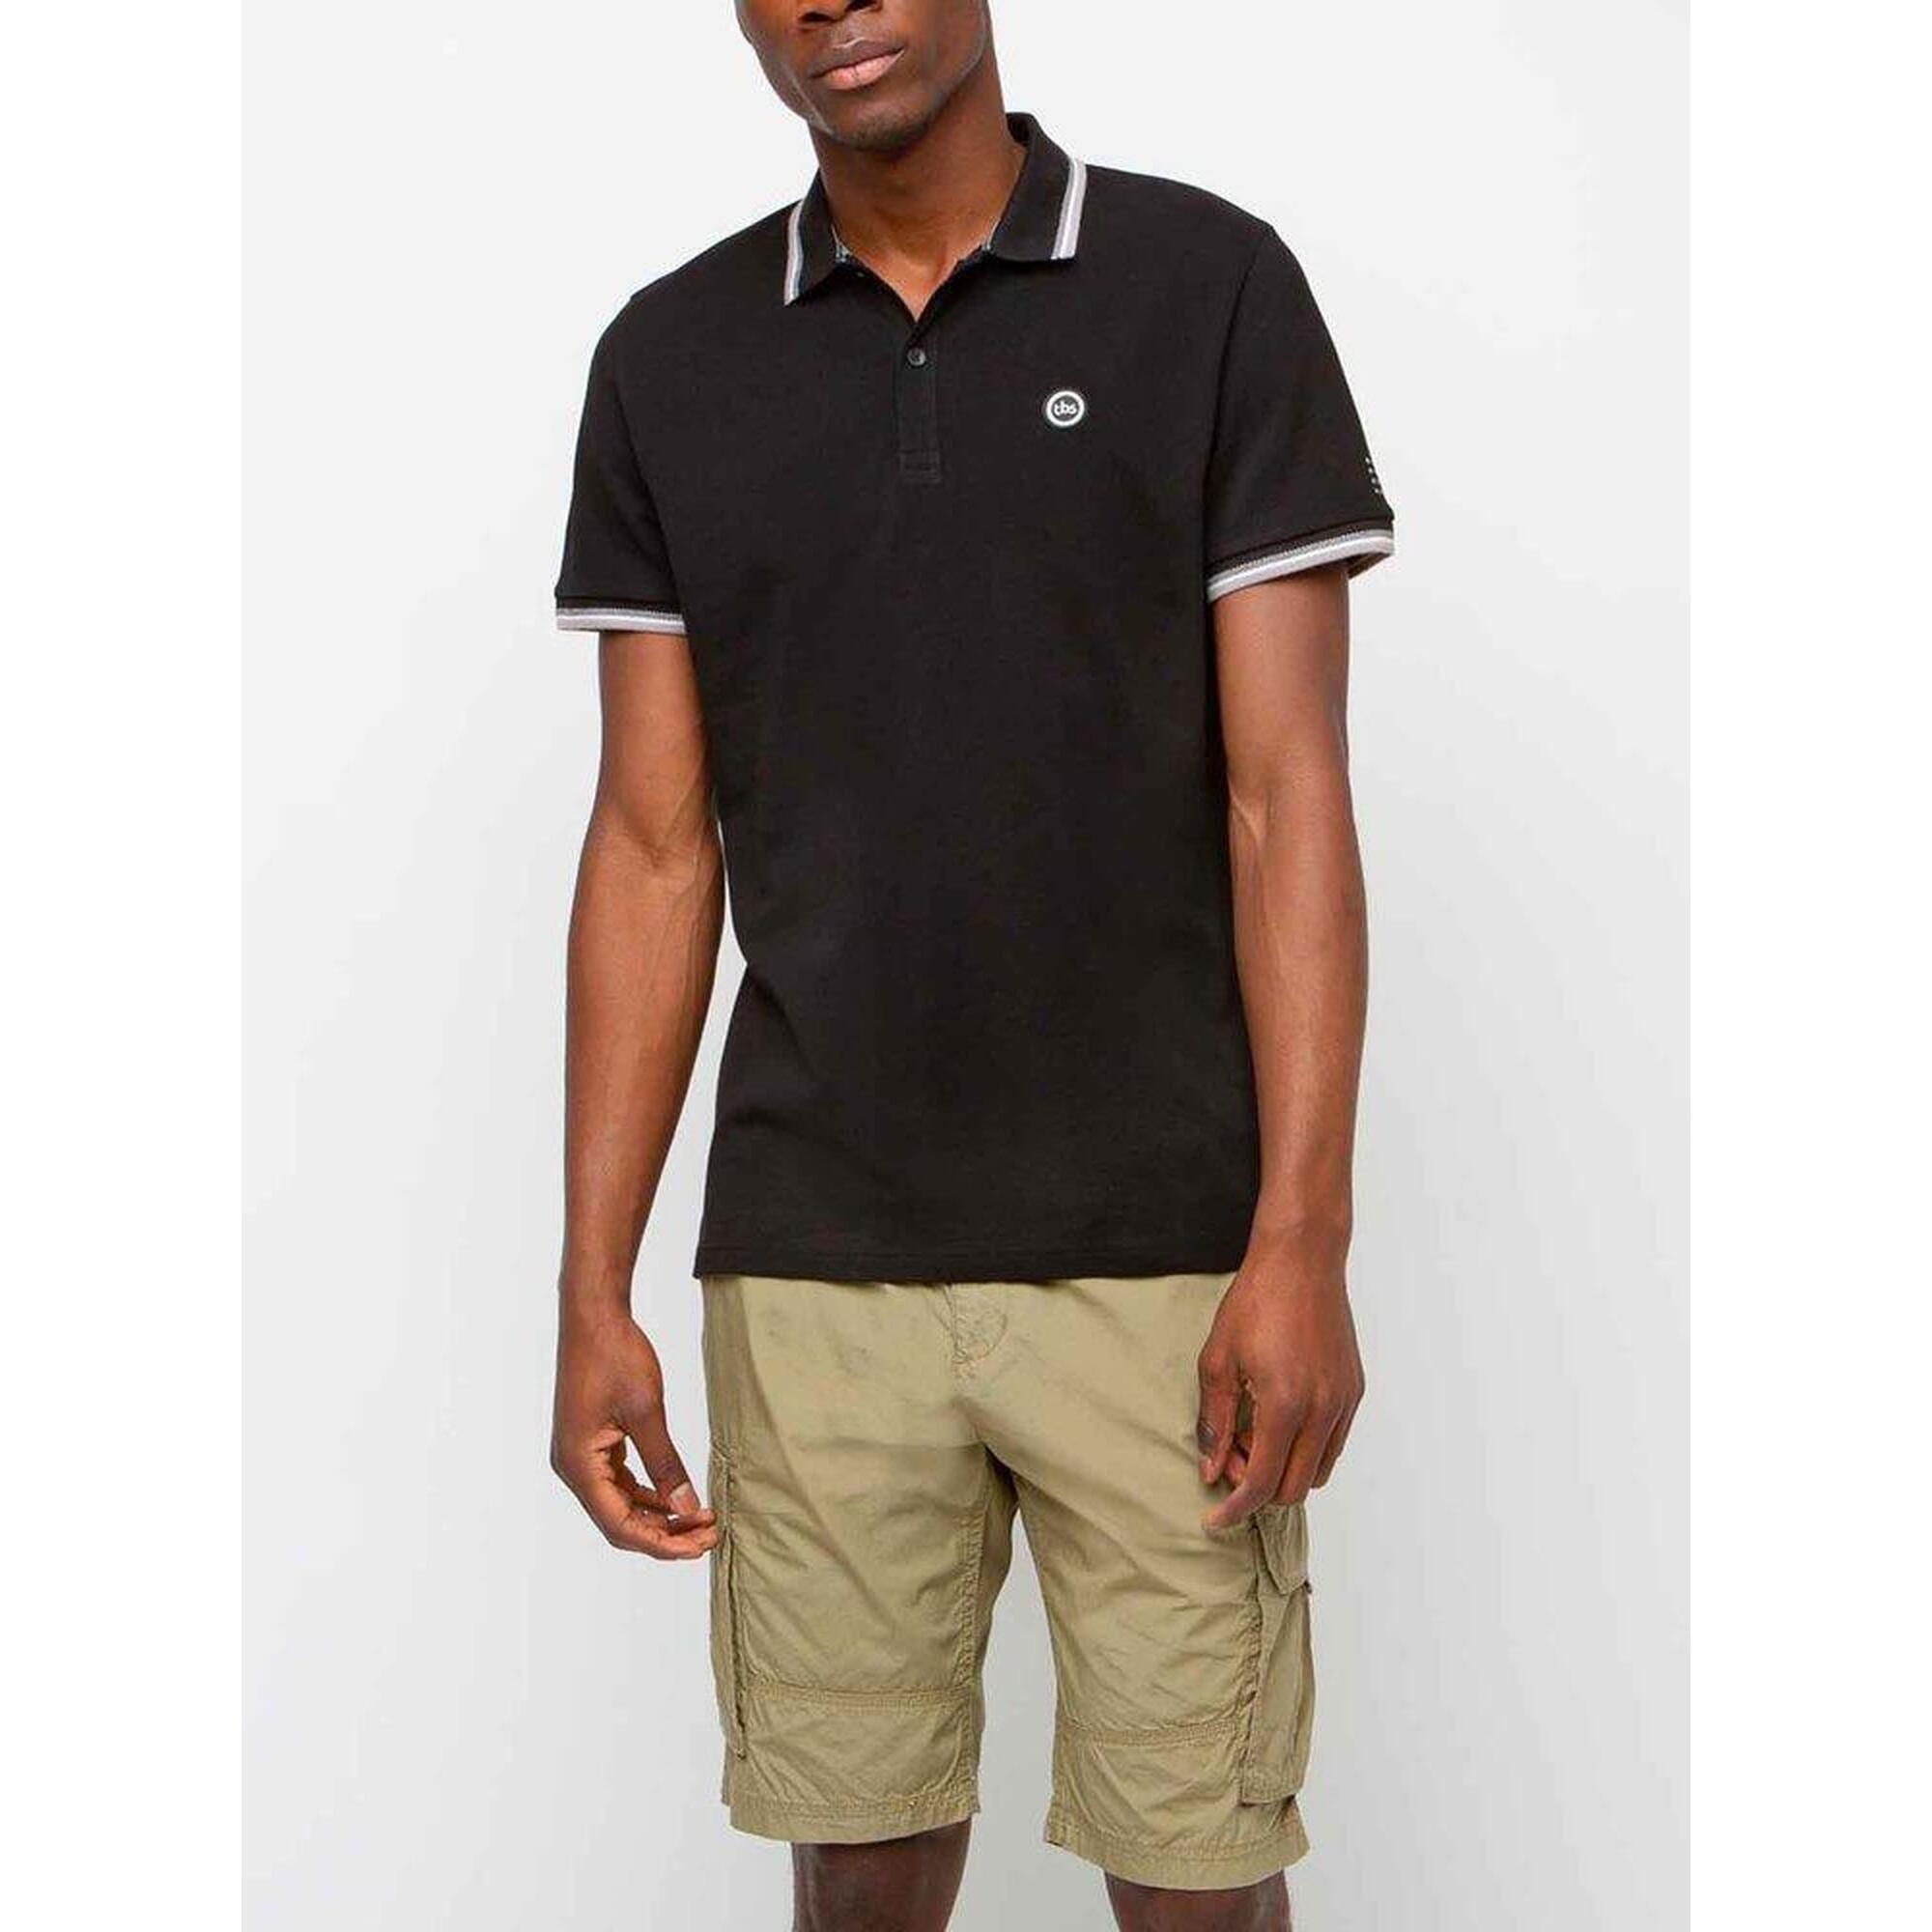 Polo manches courtes Homme - YVANEPOL Noir